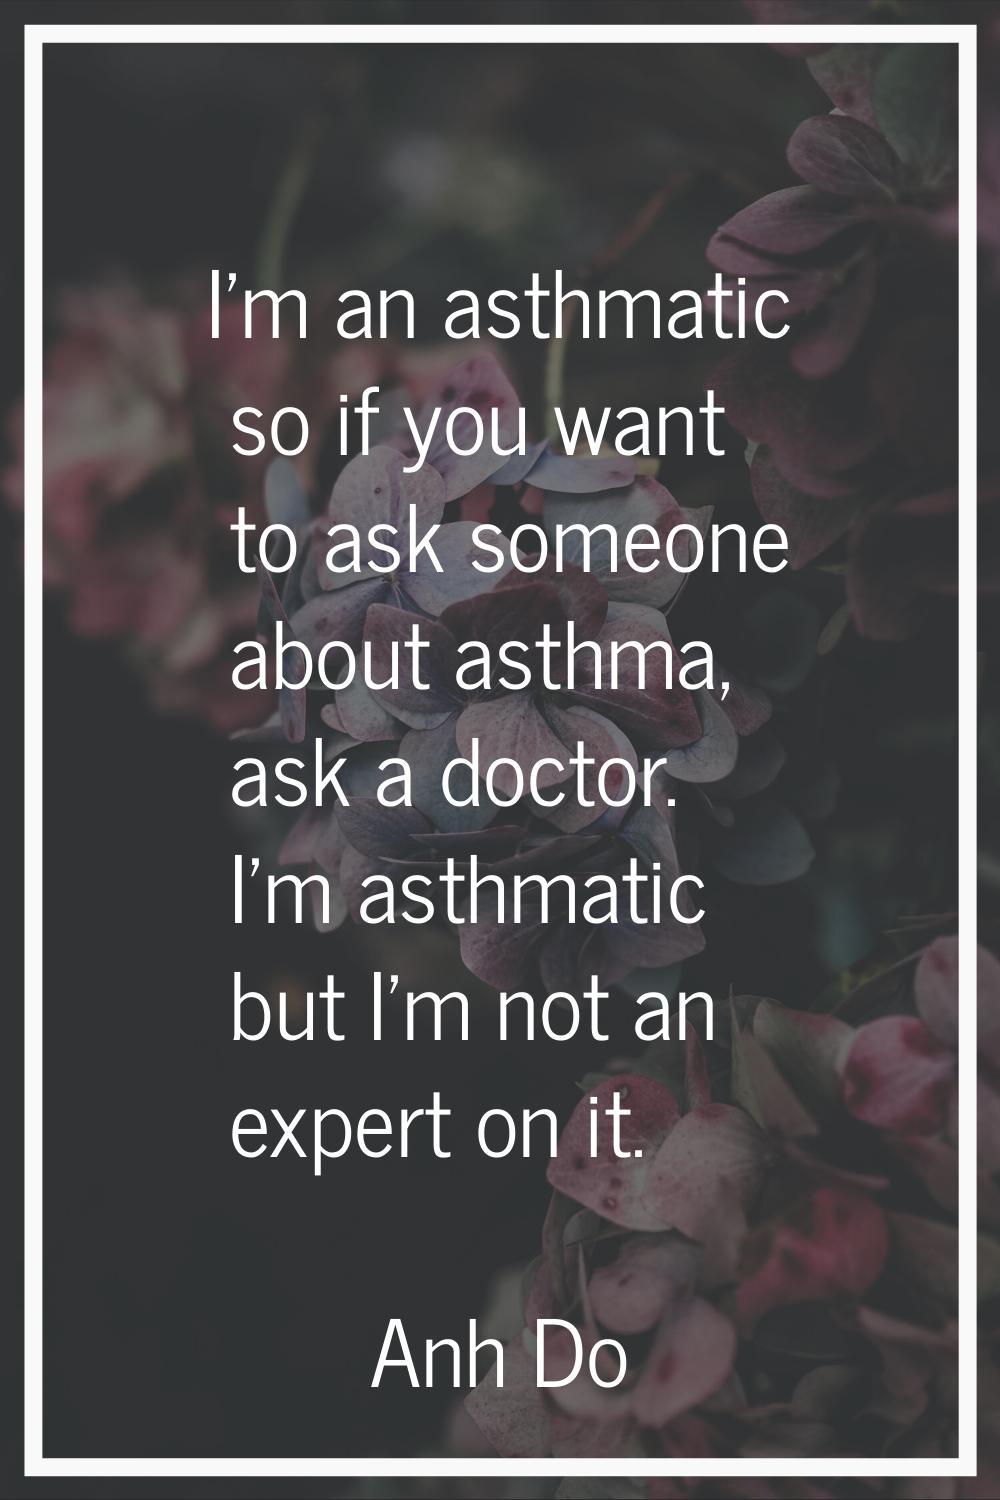 I'm an asthmatic so if you want to ask someone about asthma, ask a doctor. I'm asthmatic but I'm no